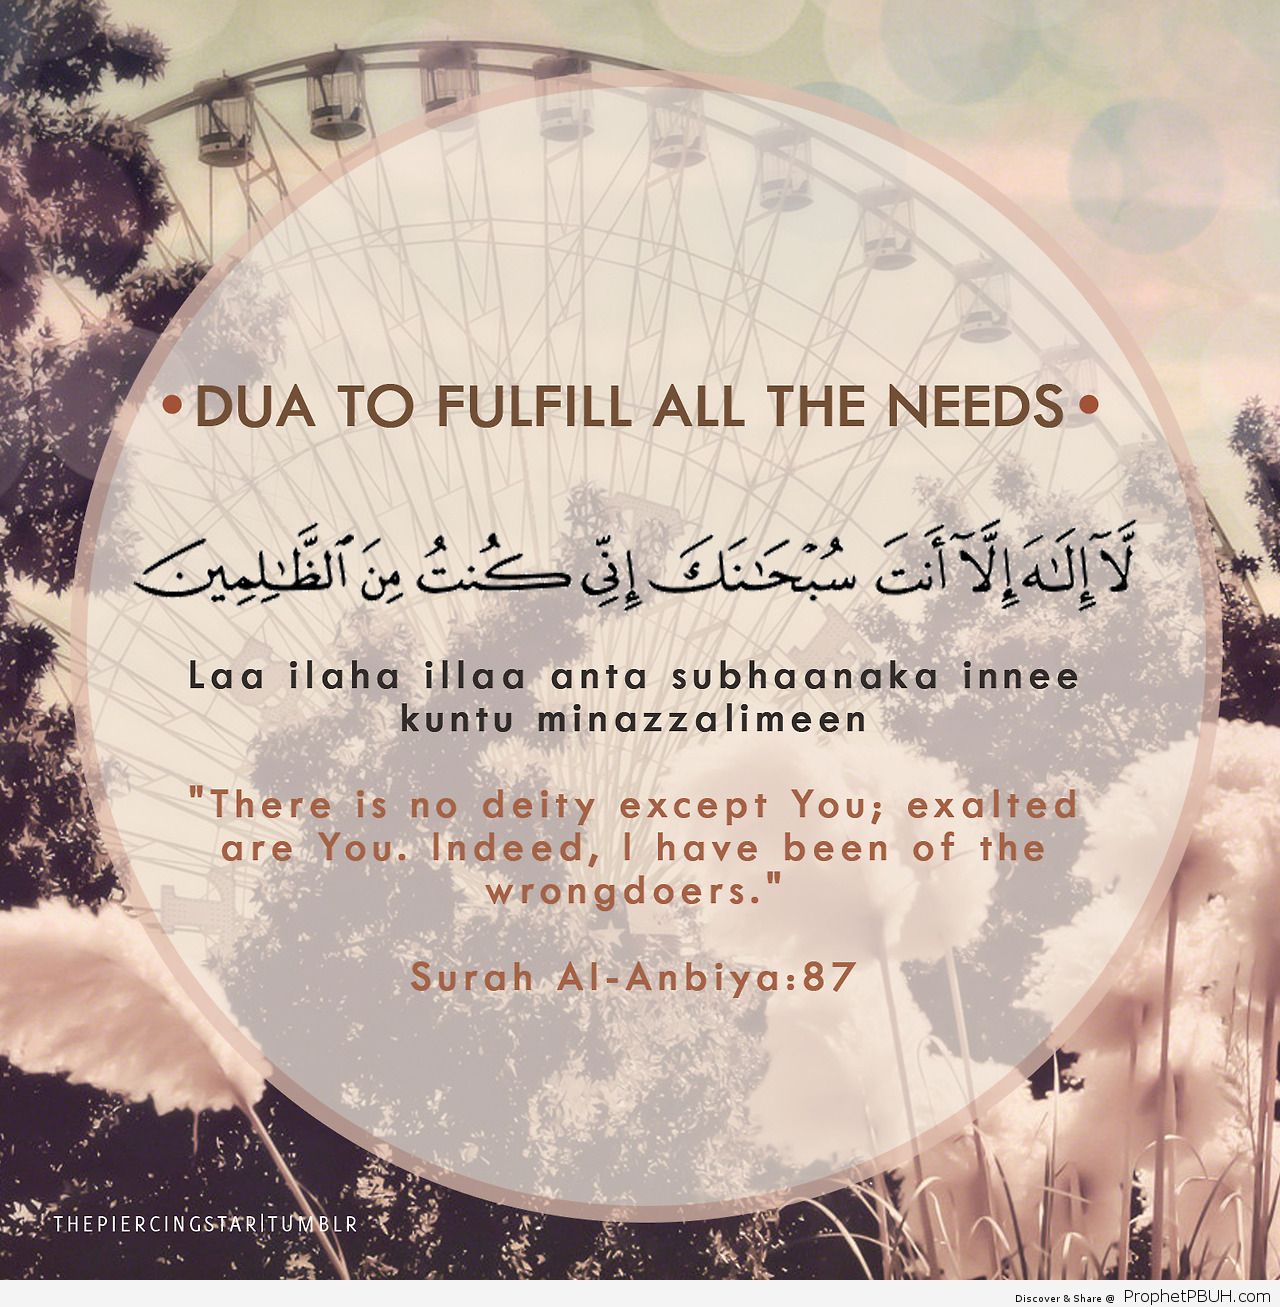 Dua to fulfill all the needs